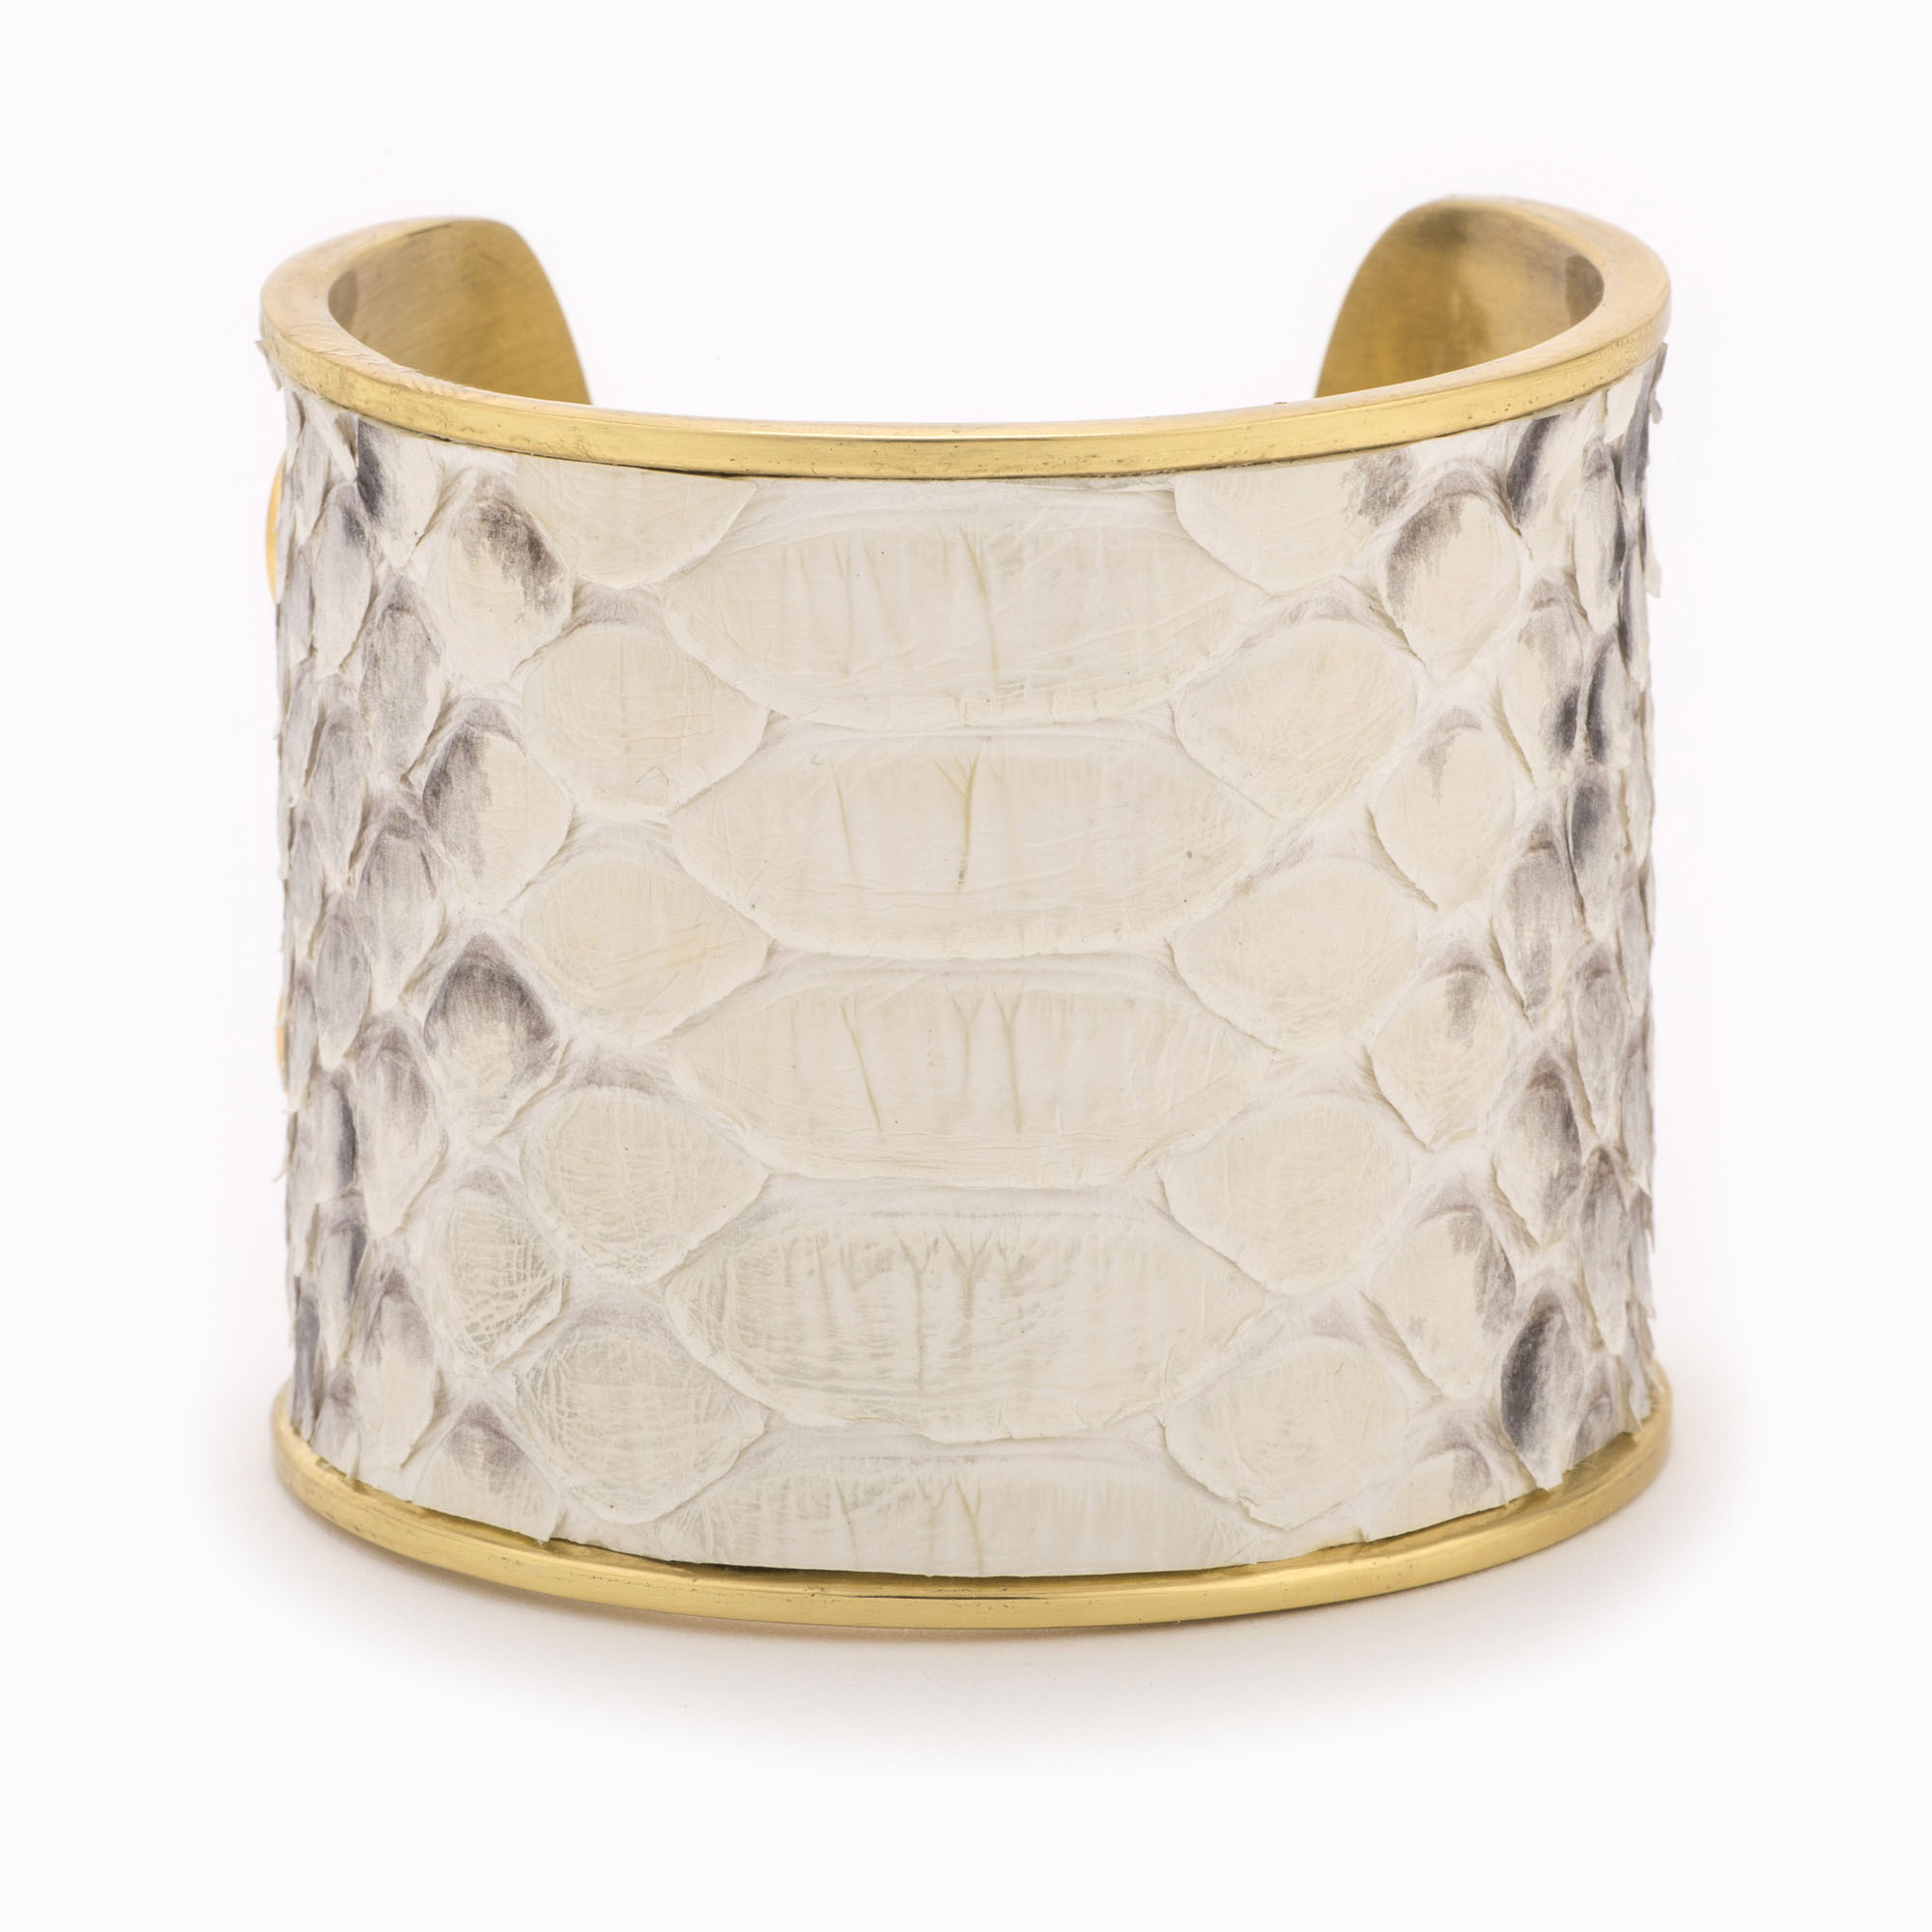 Large gold cuff with a black and white python pattern.